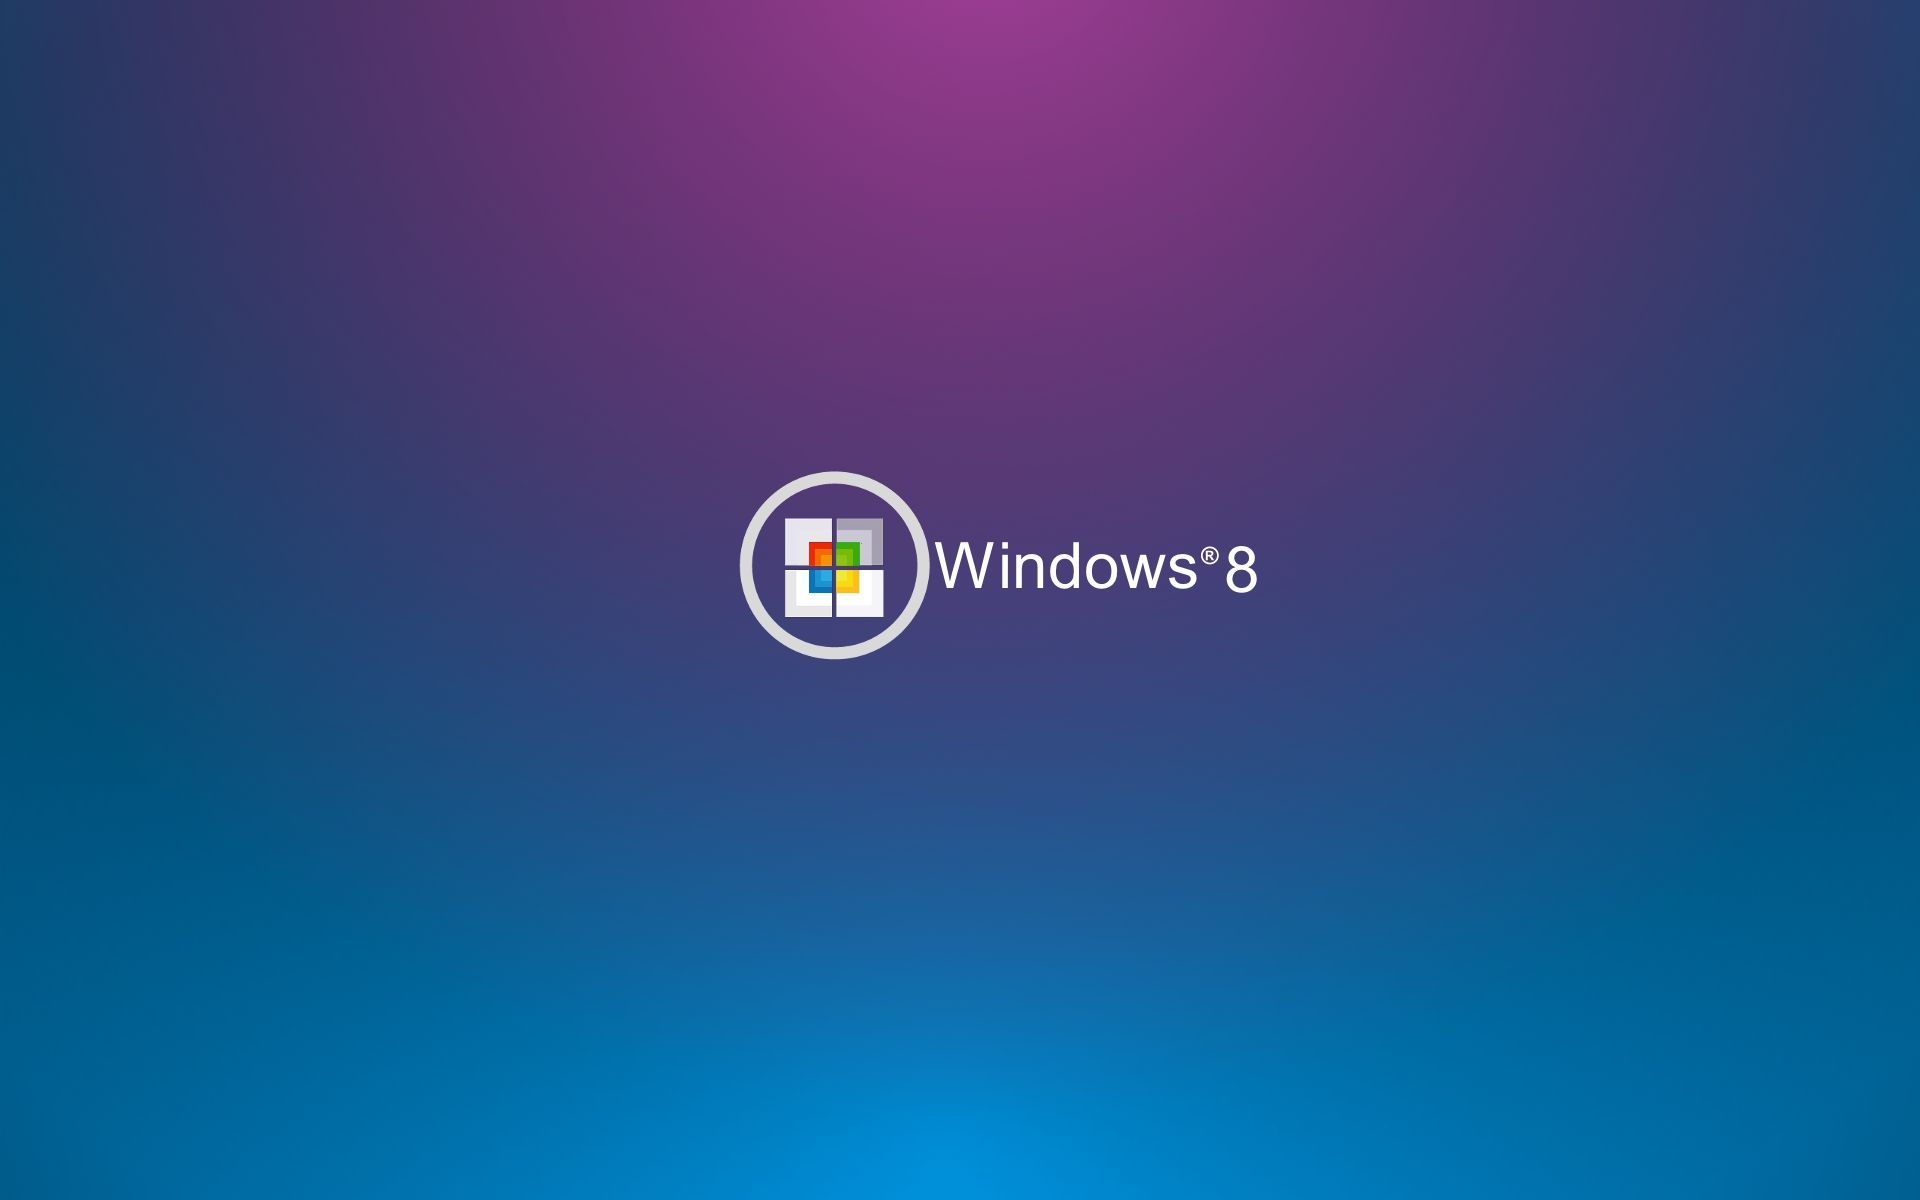 Win 8 Wallpapers favourites by sagorpirbd on DeviantArt